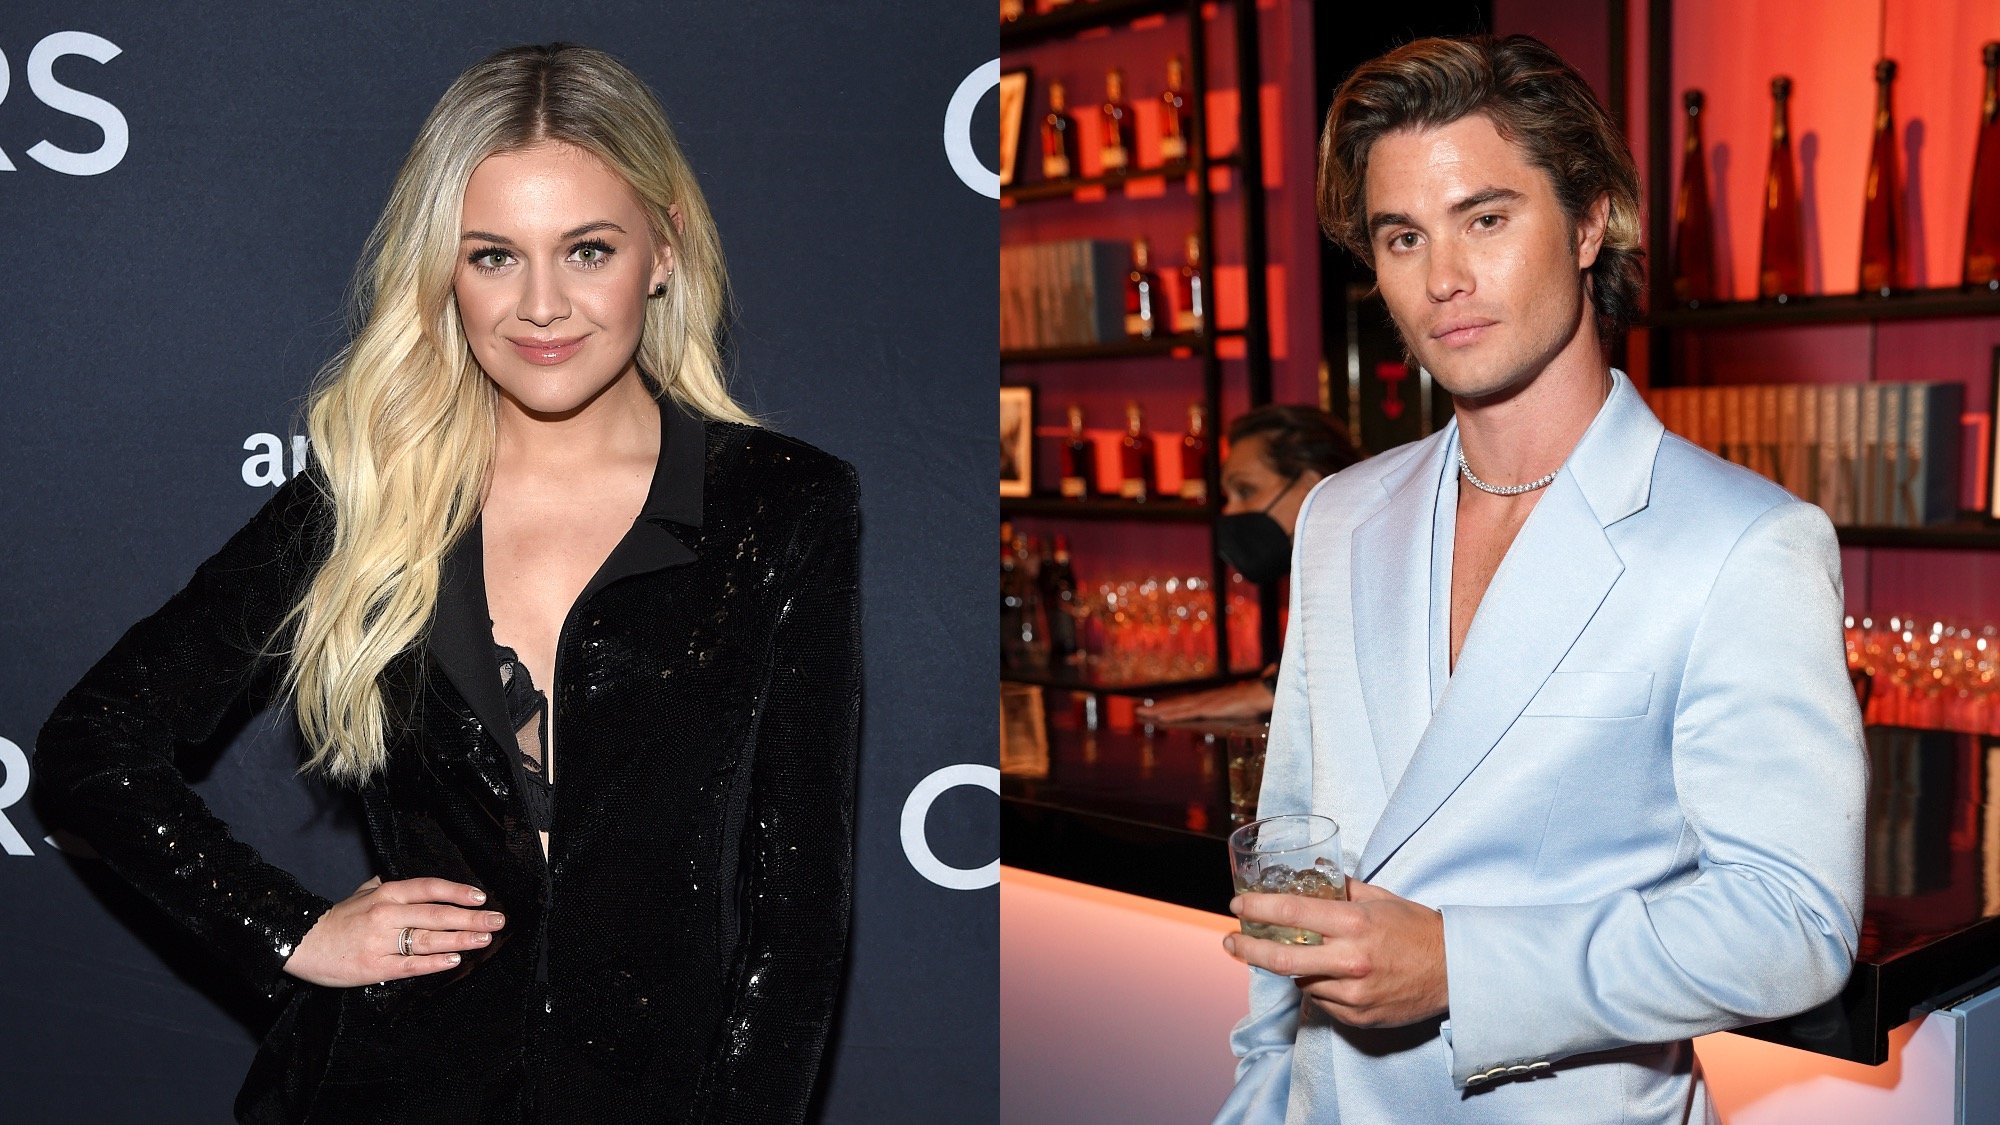 (L) Kelsea Ballerini pictured at Country Heat for CRS 2020 at Omni Hotel on February 19, 2020. (R) Chase Stokes pictured at a party in March 2022. They confirmed rumors of a relationship with a healthy display of PDA. 